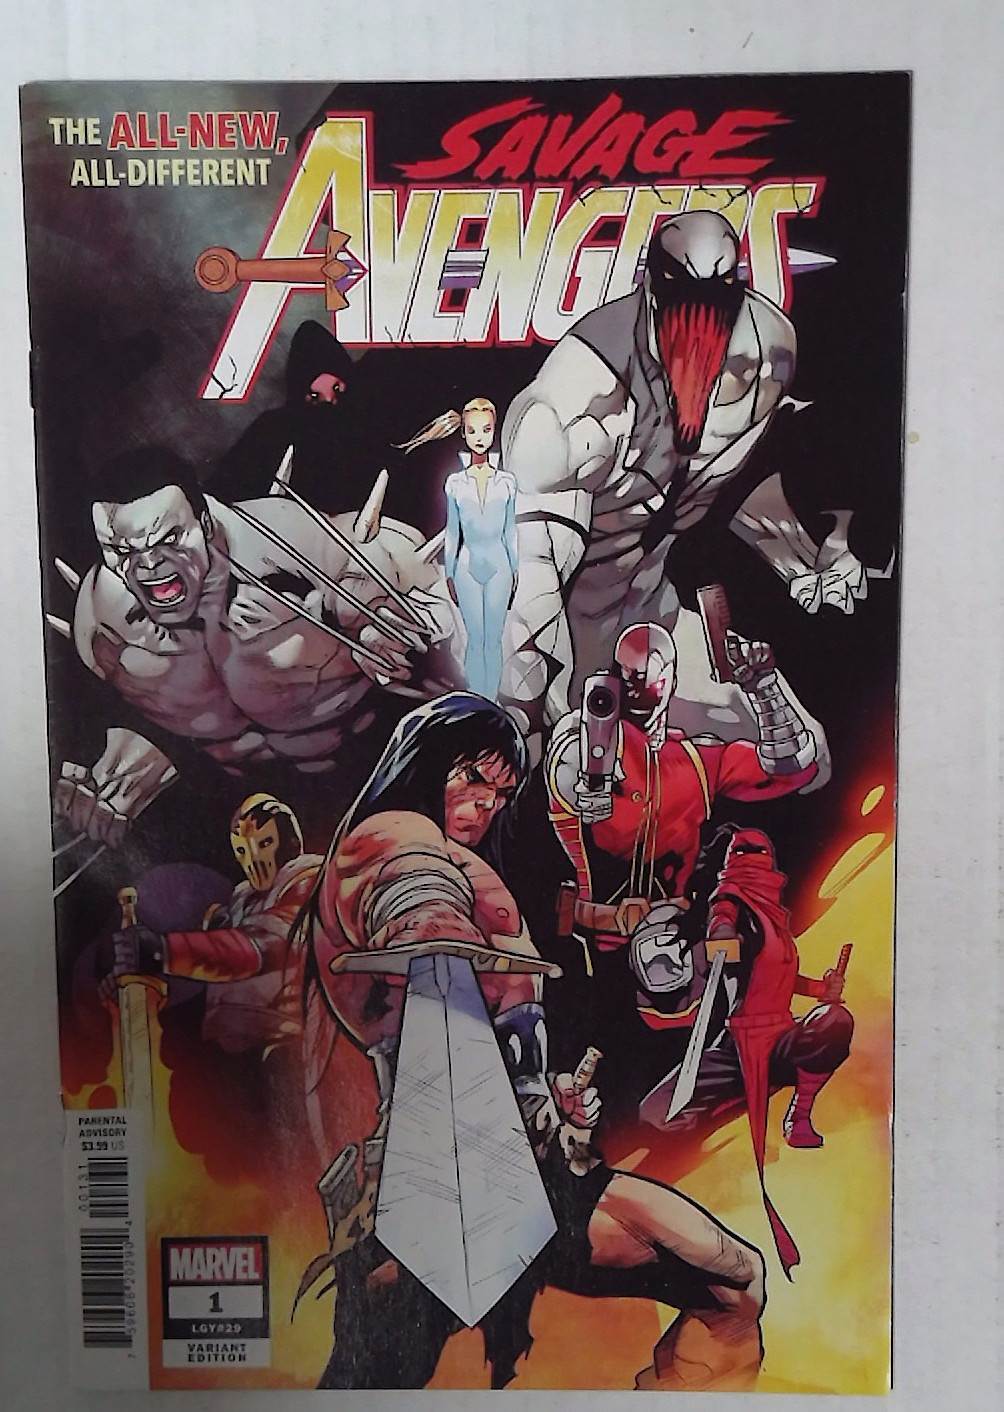 Savage Avengers #1 Marvel (2022) All-New, All-Different Comic Book